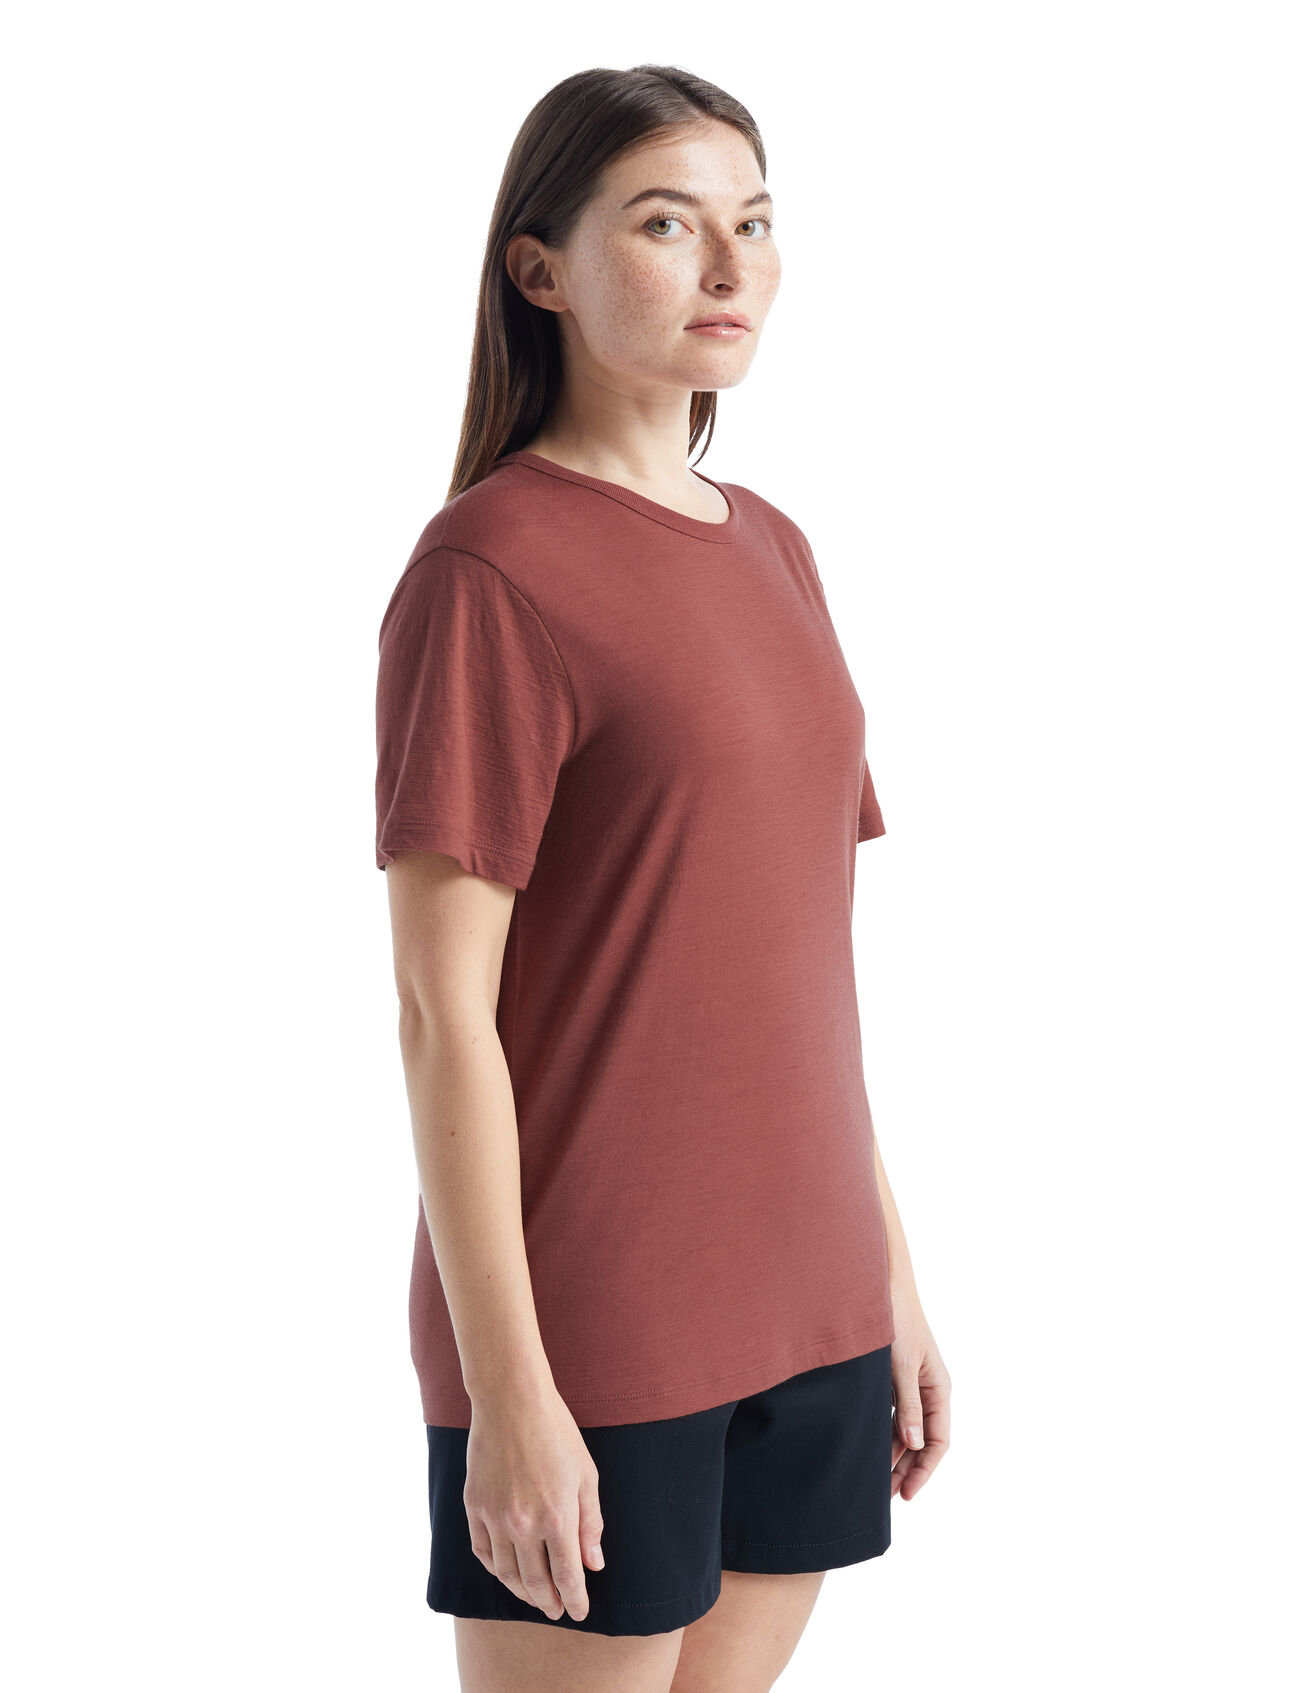 Womens Merino Granary Short Sleeve T-Shirt A classic tee with a relaxed fit and soft, breathable, 100% merino wool fabric, the Granary Short Sleeve Tee is all about everyday comfort and style.